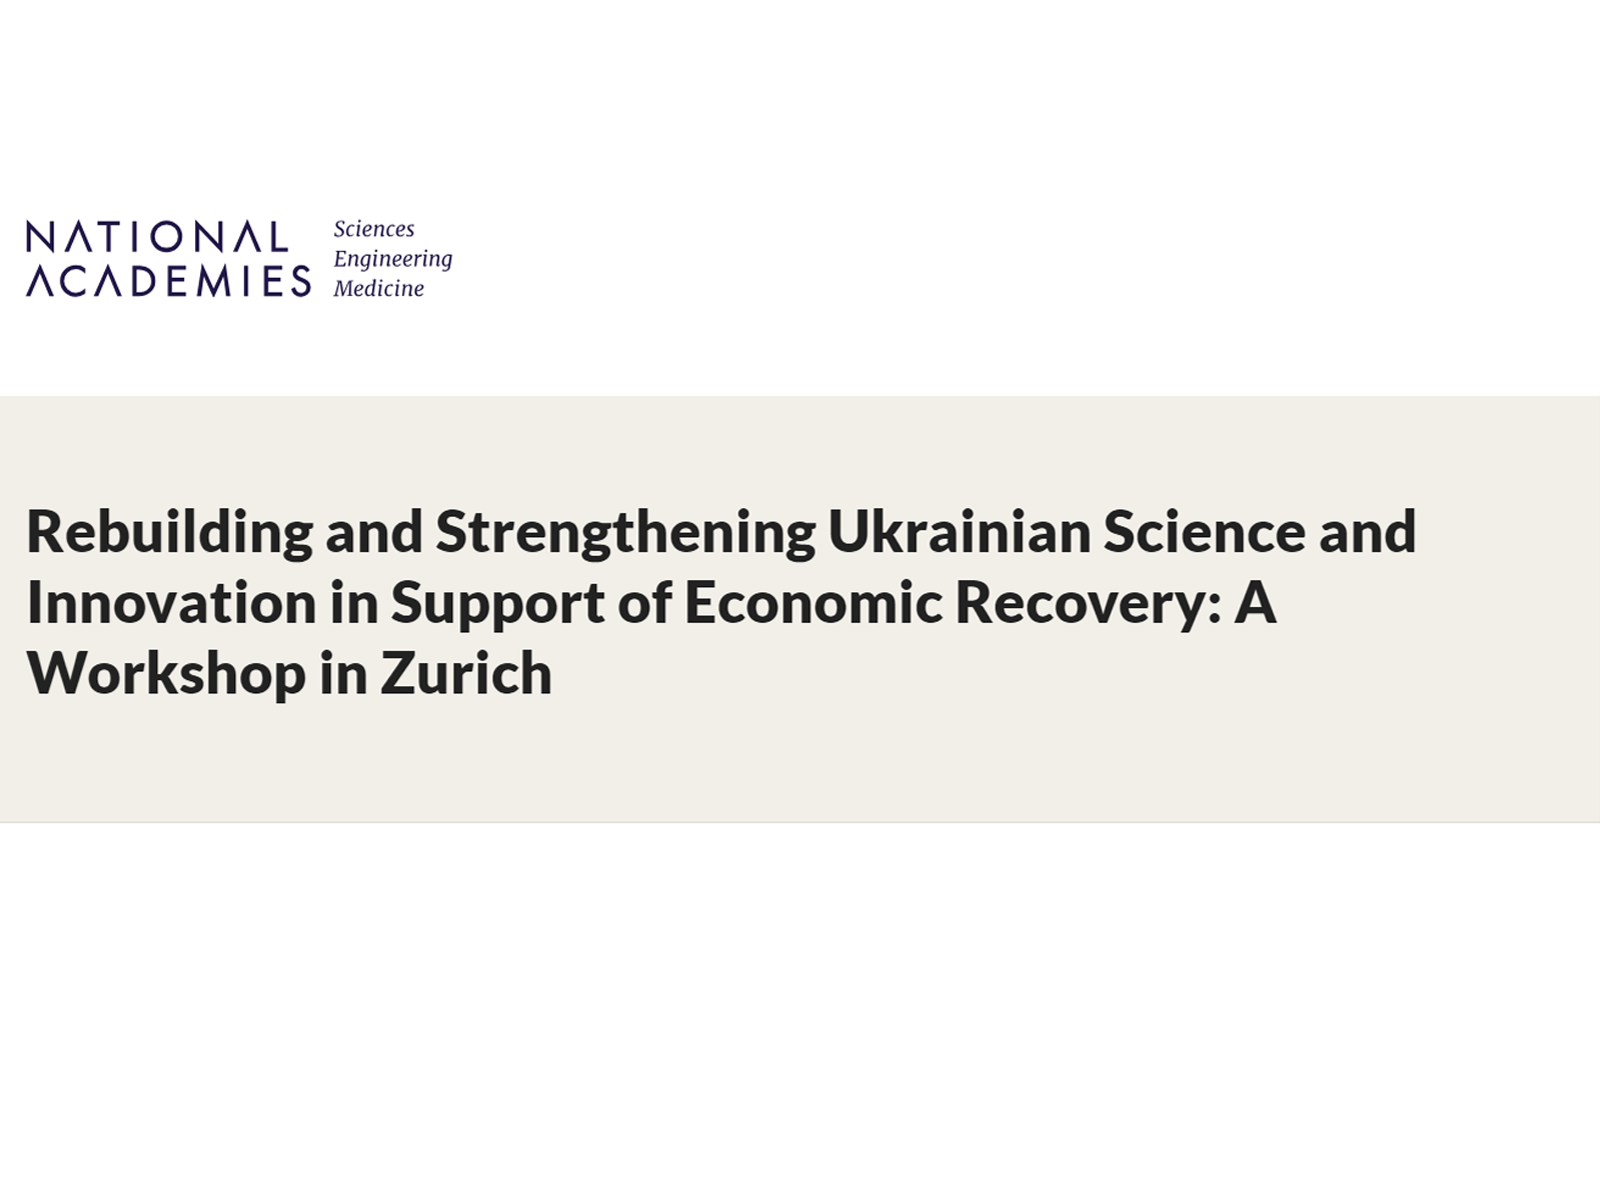 Rebuilding and Strengthening Ukrainian Science and Innovation in Support of Economic Recovery: A Workshop in Zurich